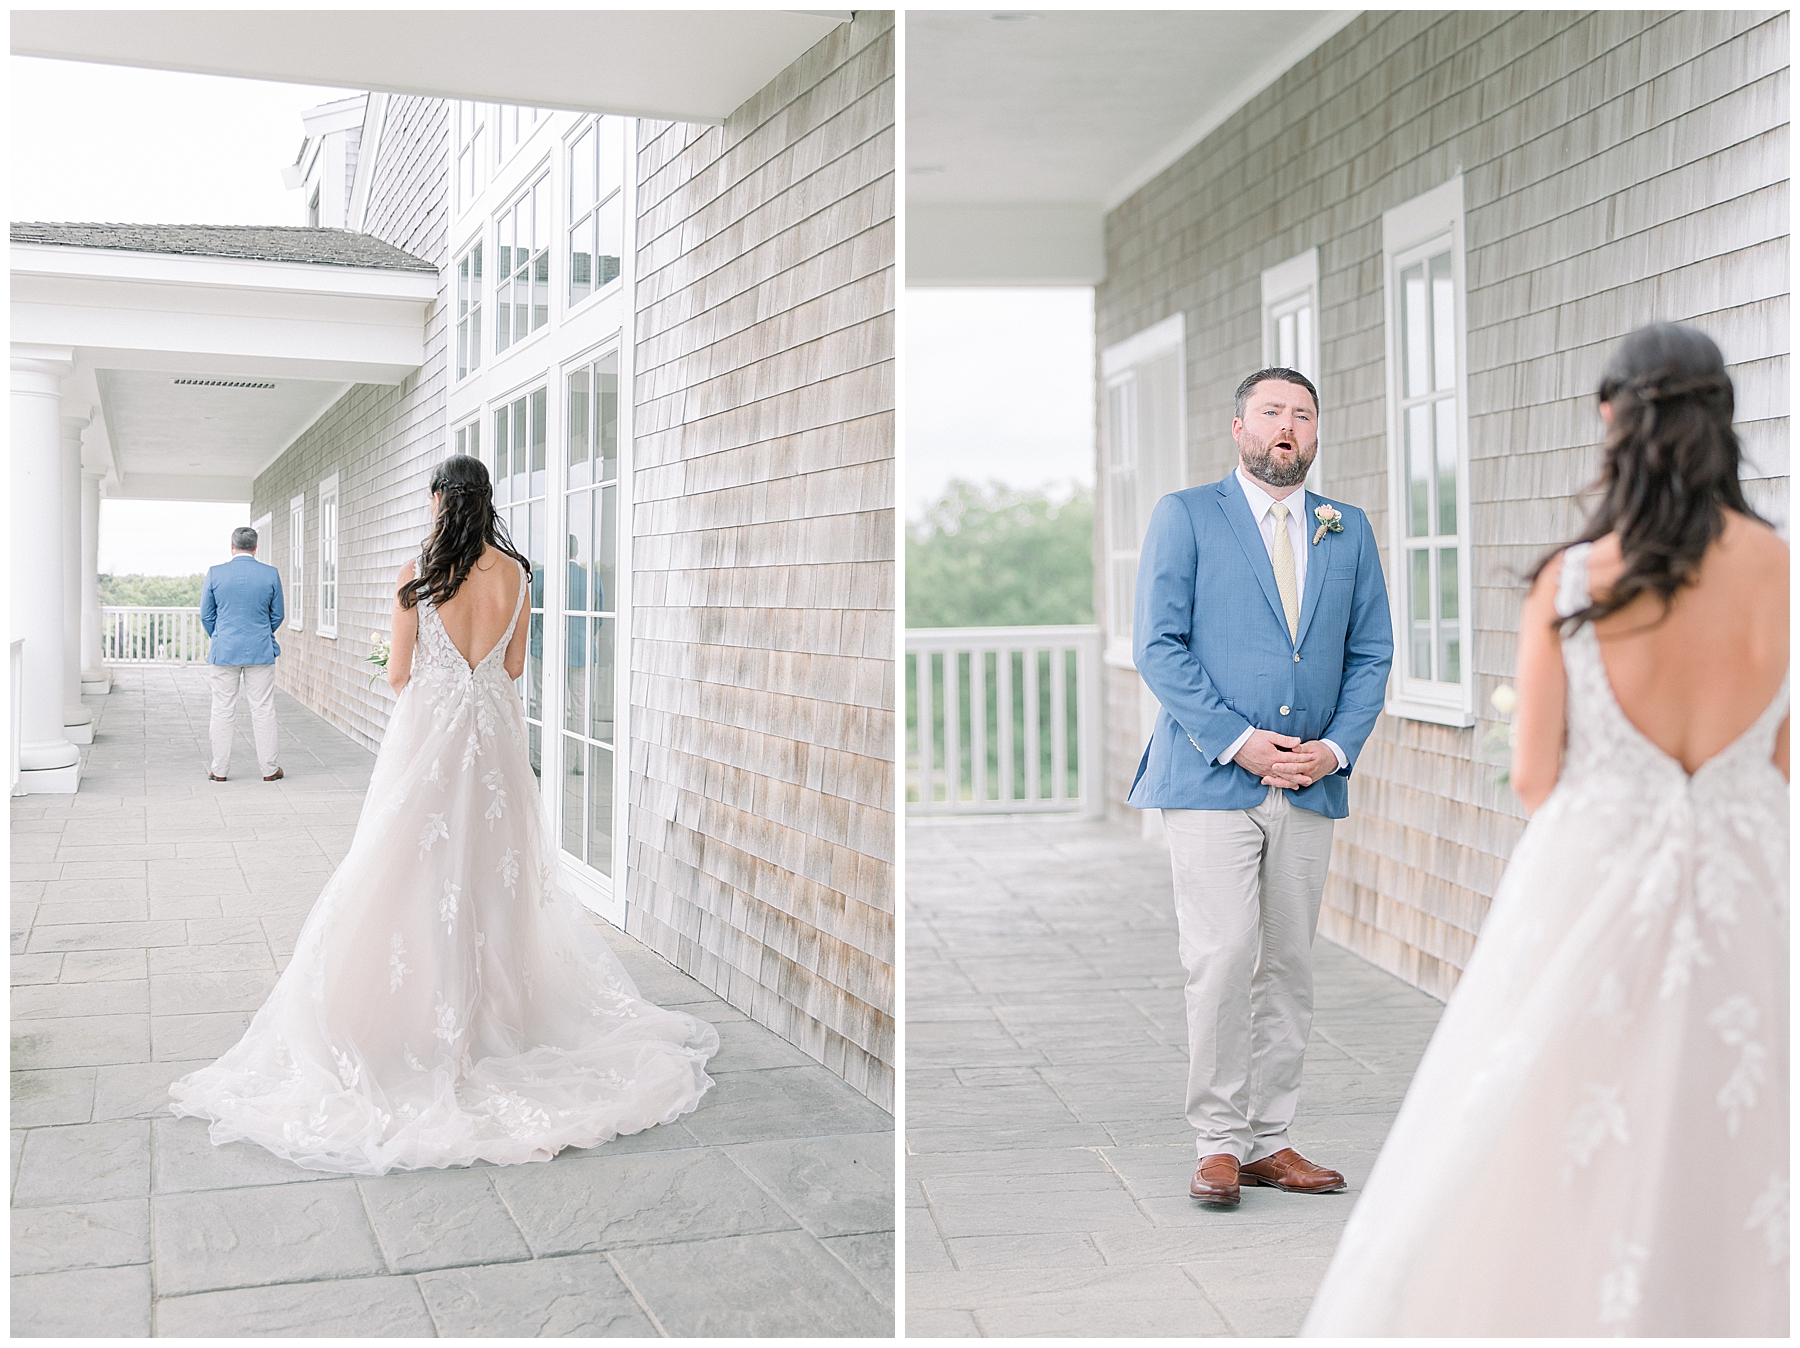 Bride + Groom during first look by bride during first look with bridesmaids by Stephanie Berenson Photography